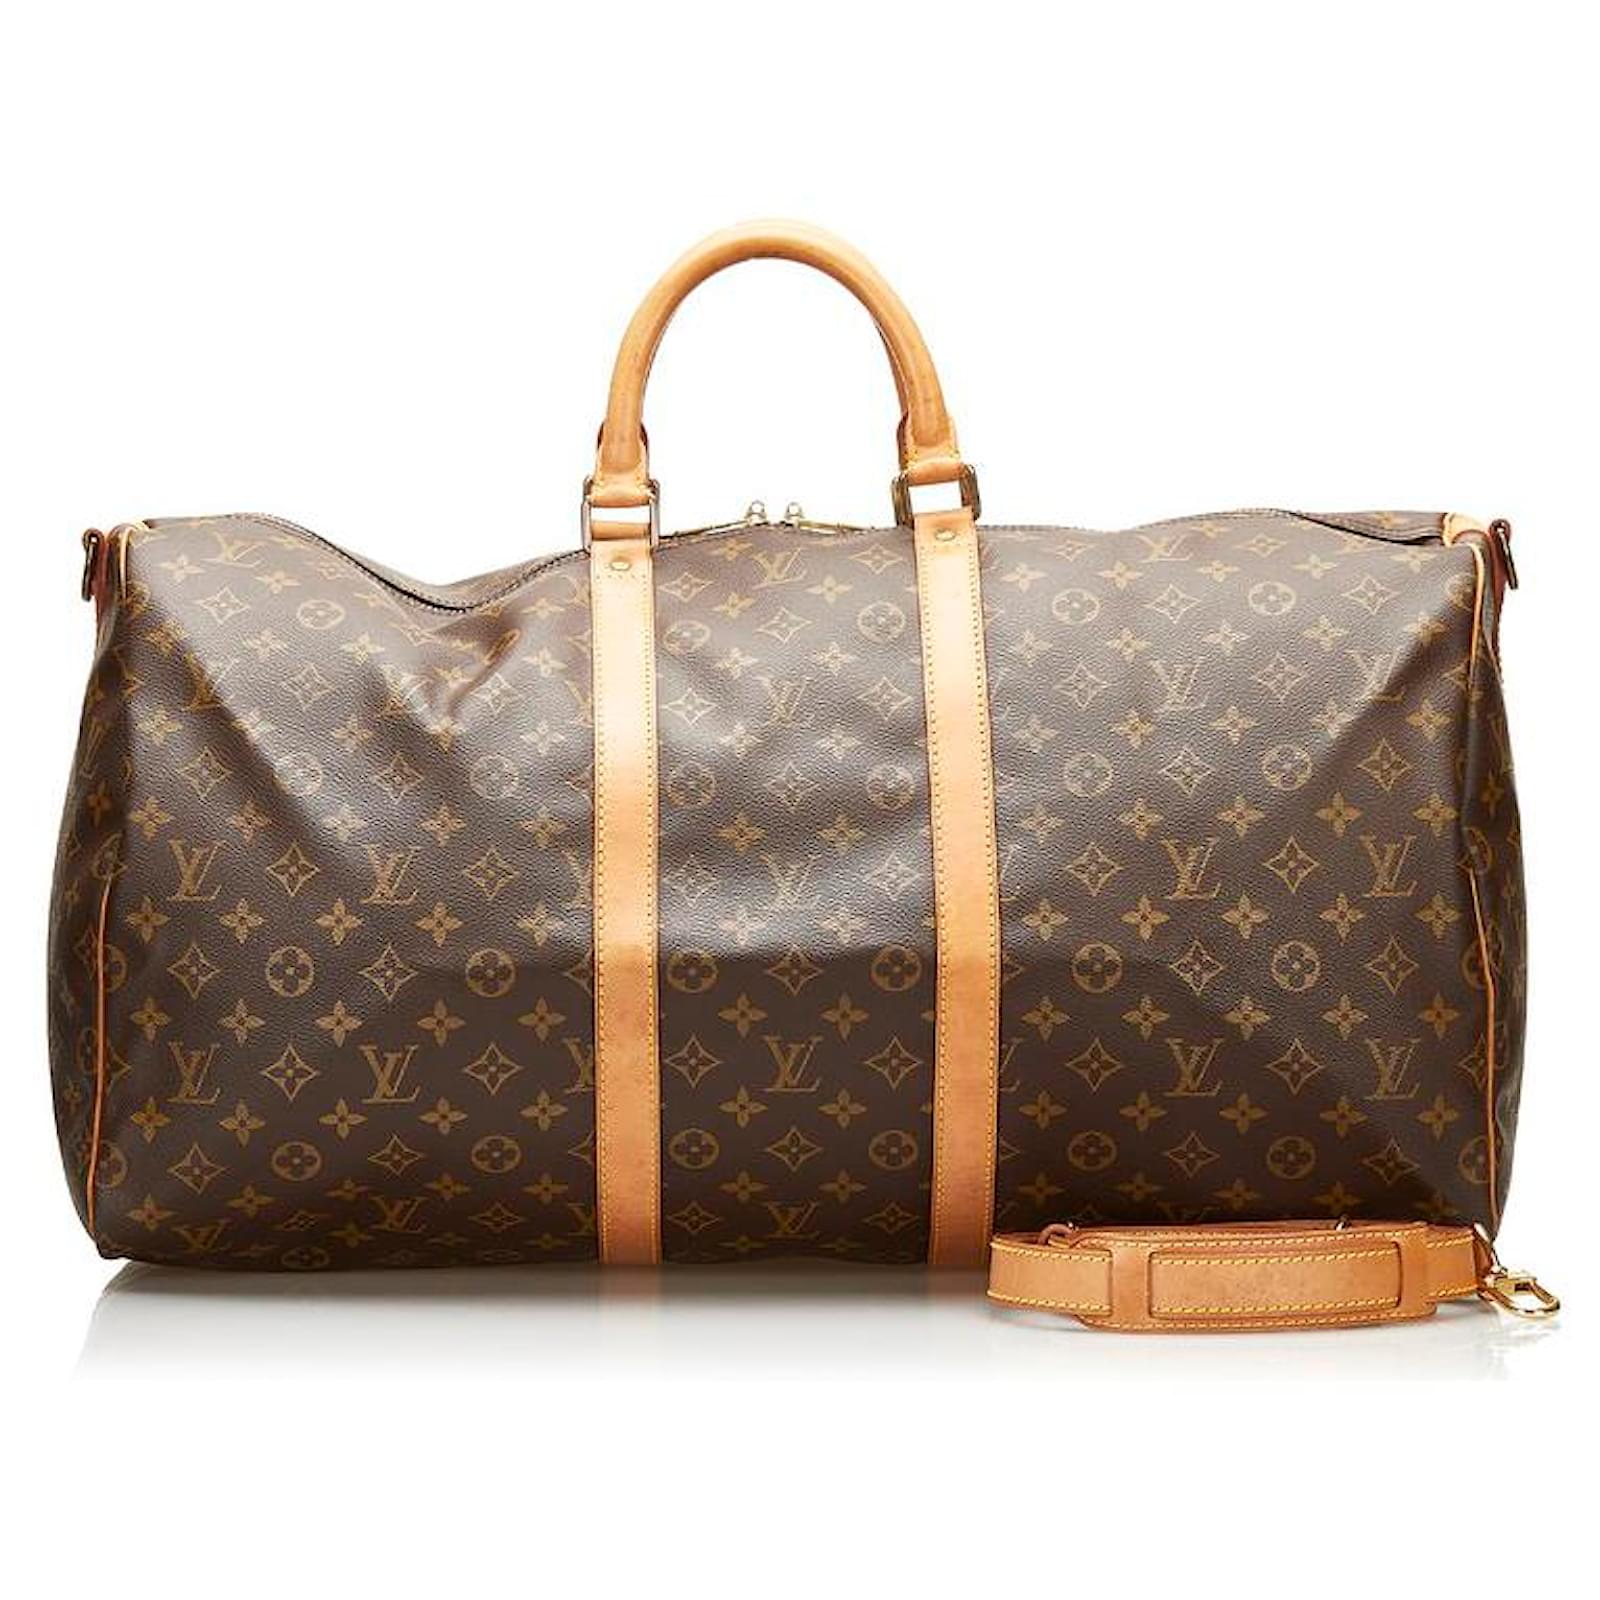 Louis Vuitton Waterproof Keepall Bandouliere 55 Duffle Bag with